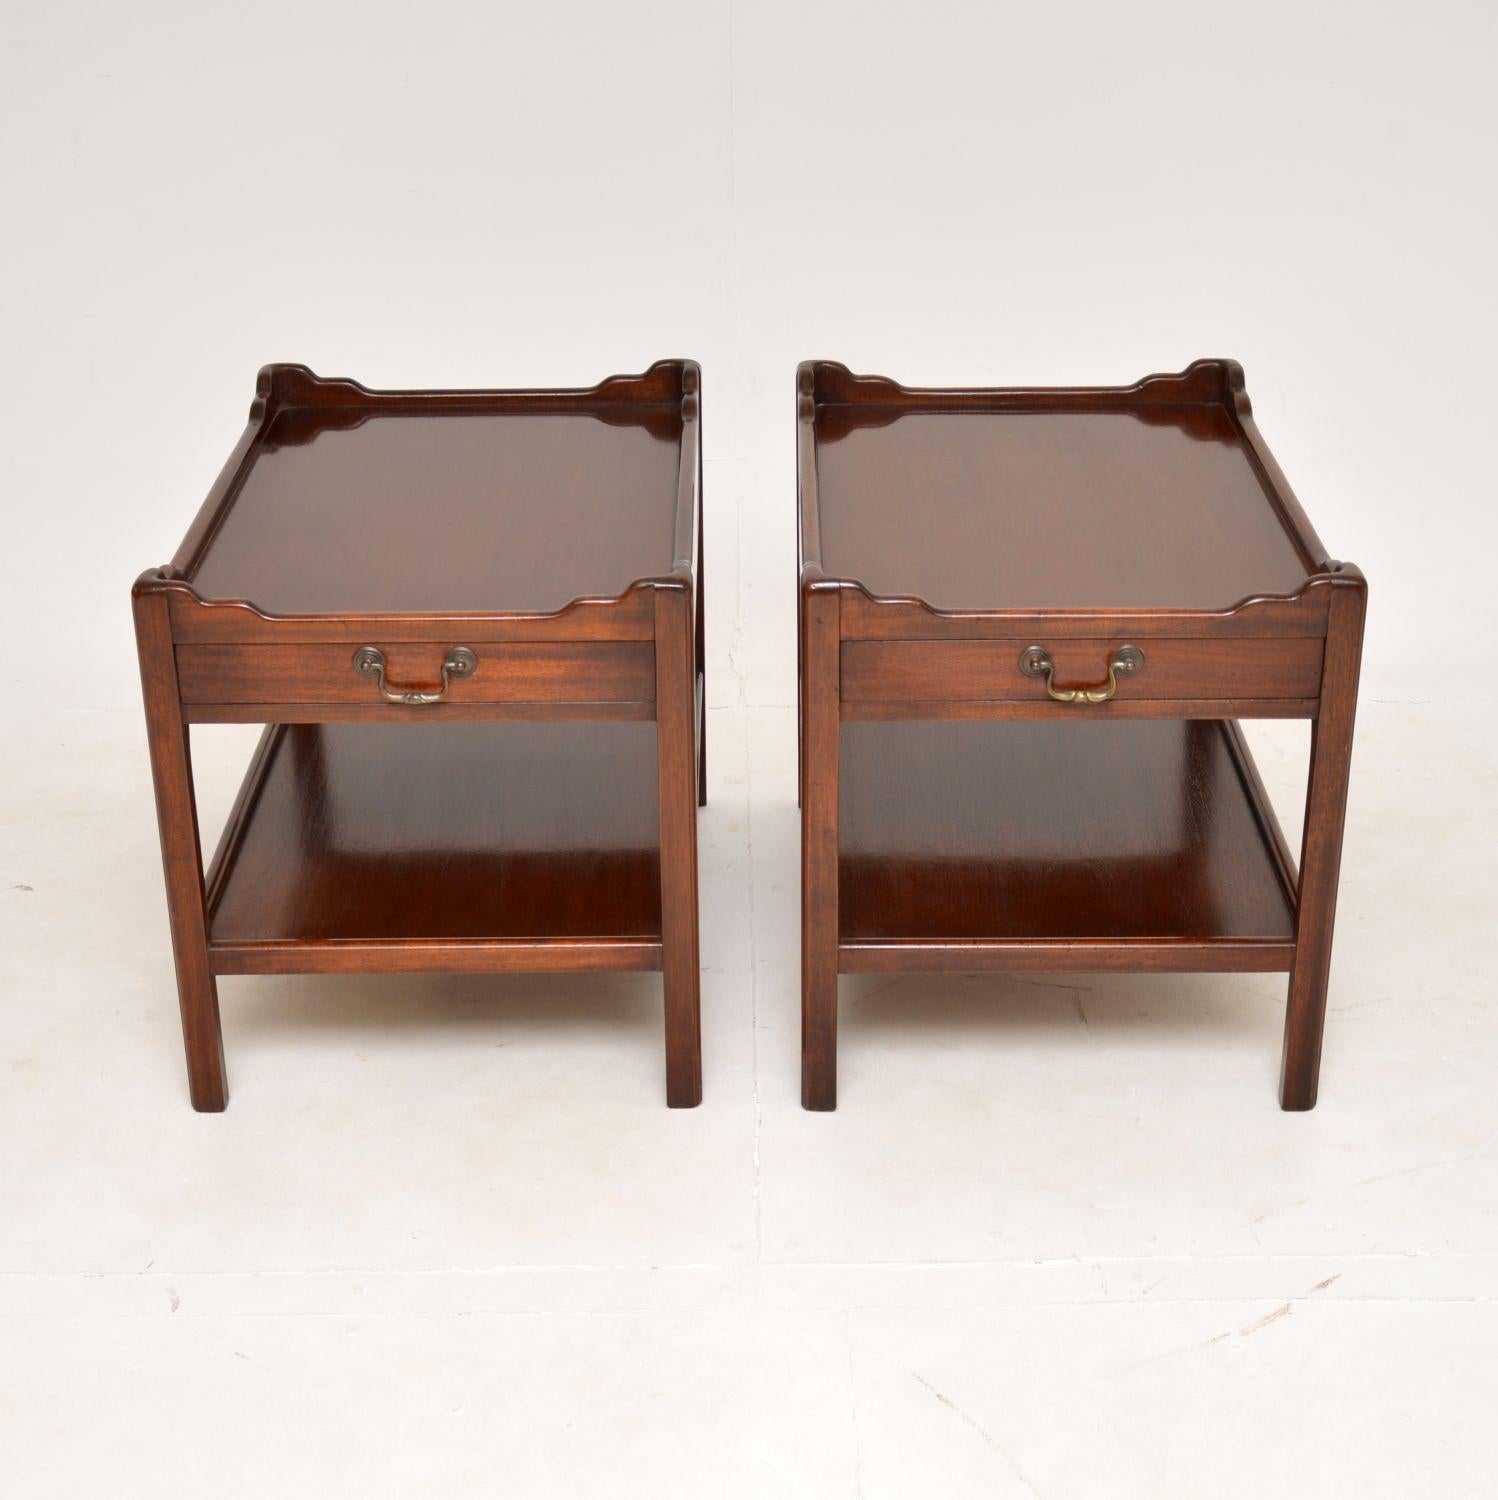 A very well made and useful pair of antique wooden side tables in the Georgian style. They were made in England, and date from around the 1950’s.

They are of super quality and have a very practical design. The tops have raised edges with a single